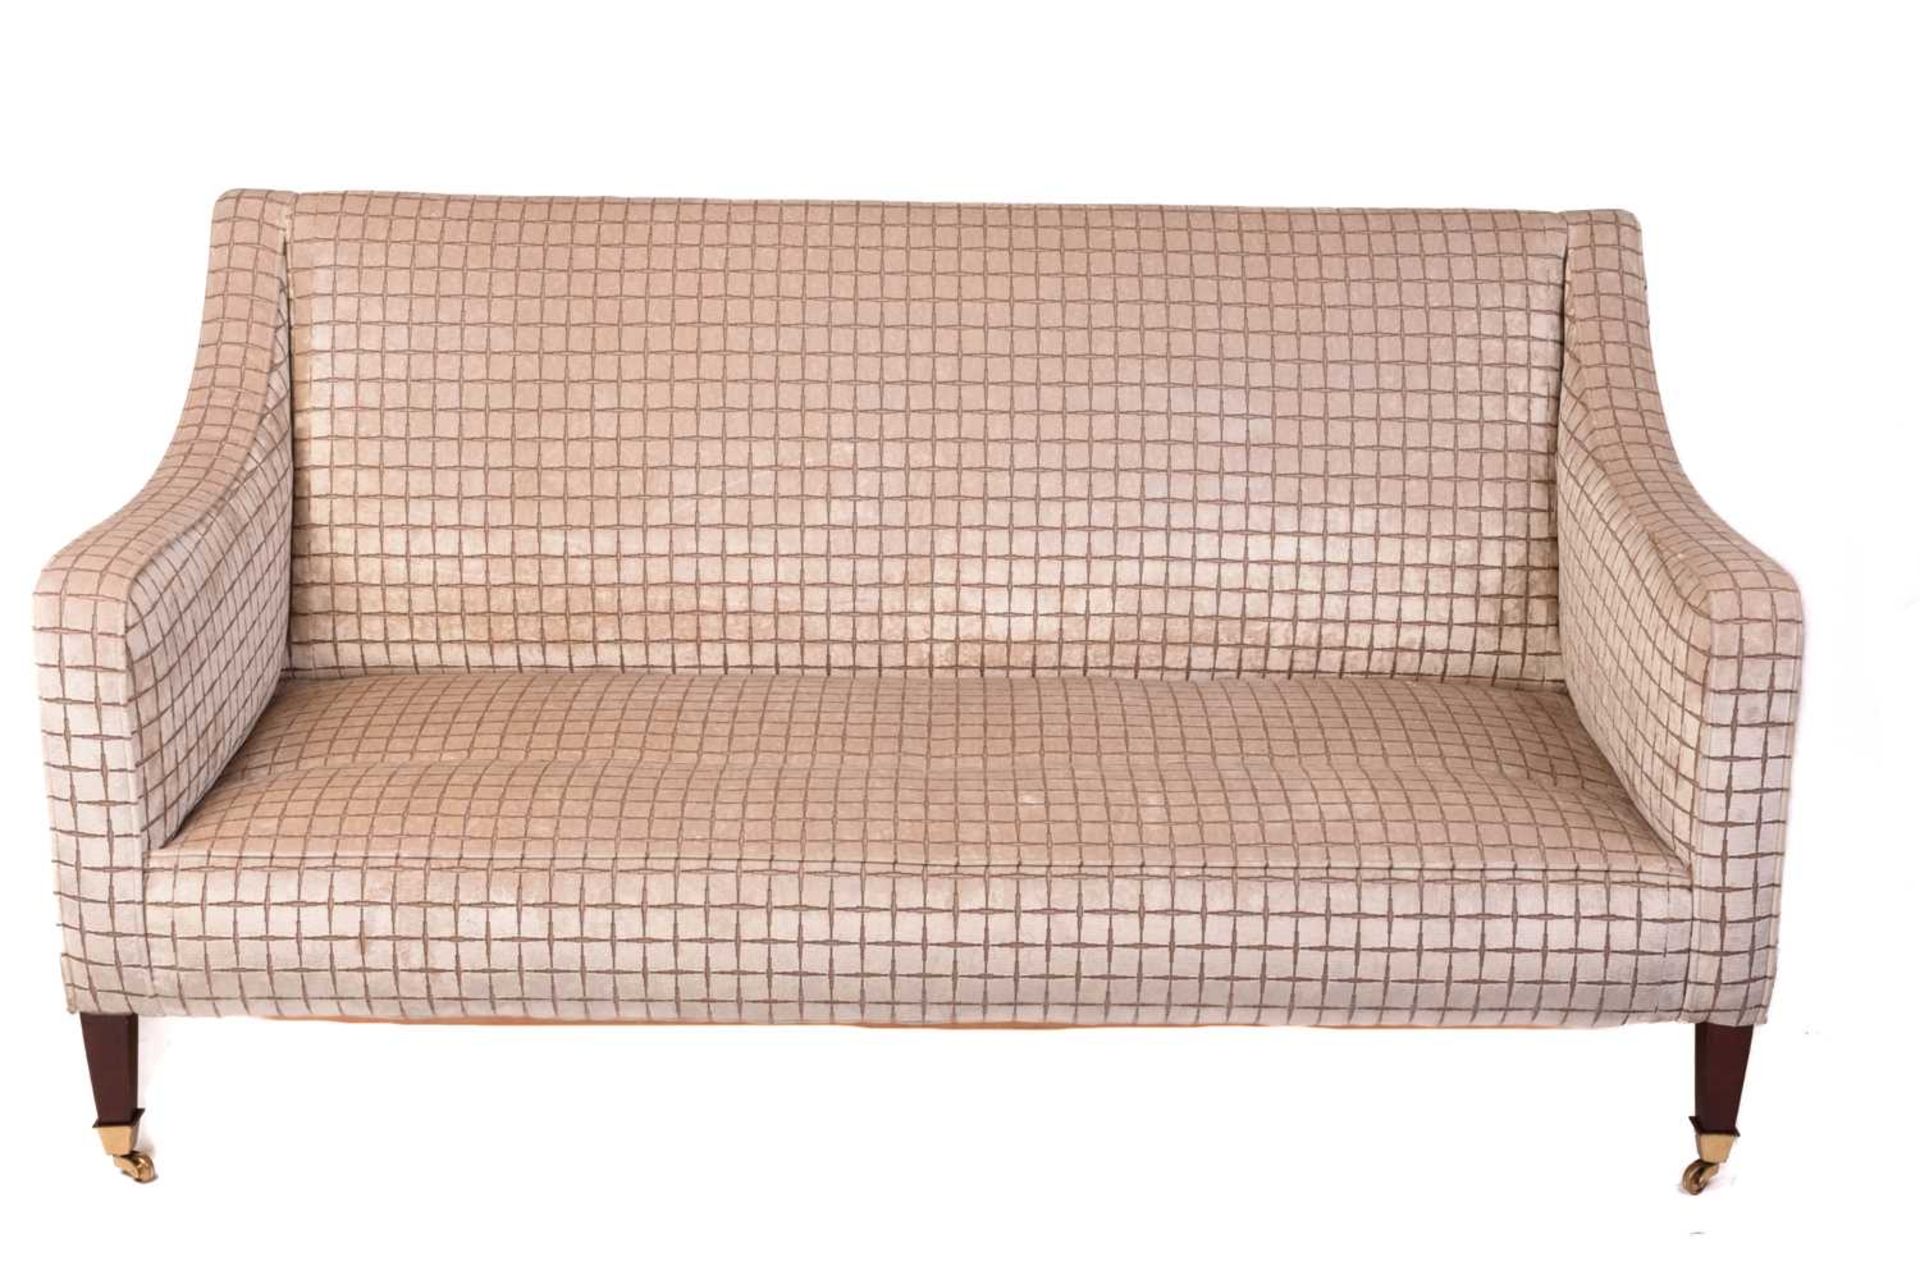 A Regency style settee, 20th century, well upholstered in a square grid pattern material, on - Image 3 of 8